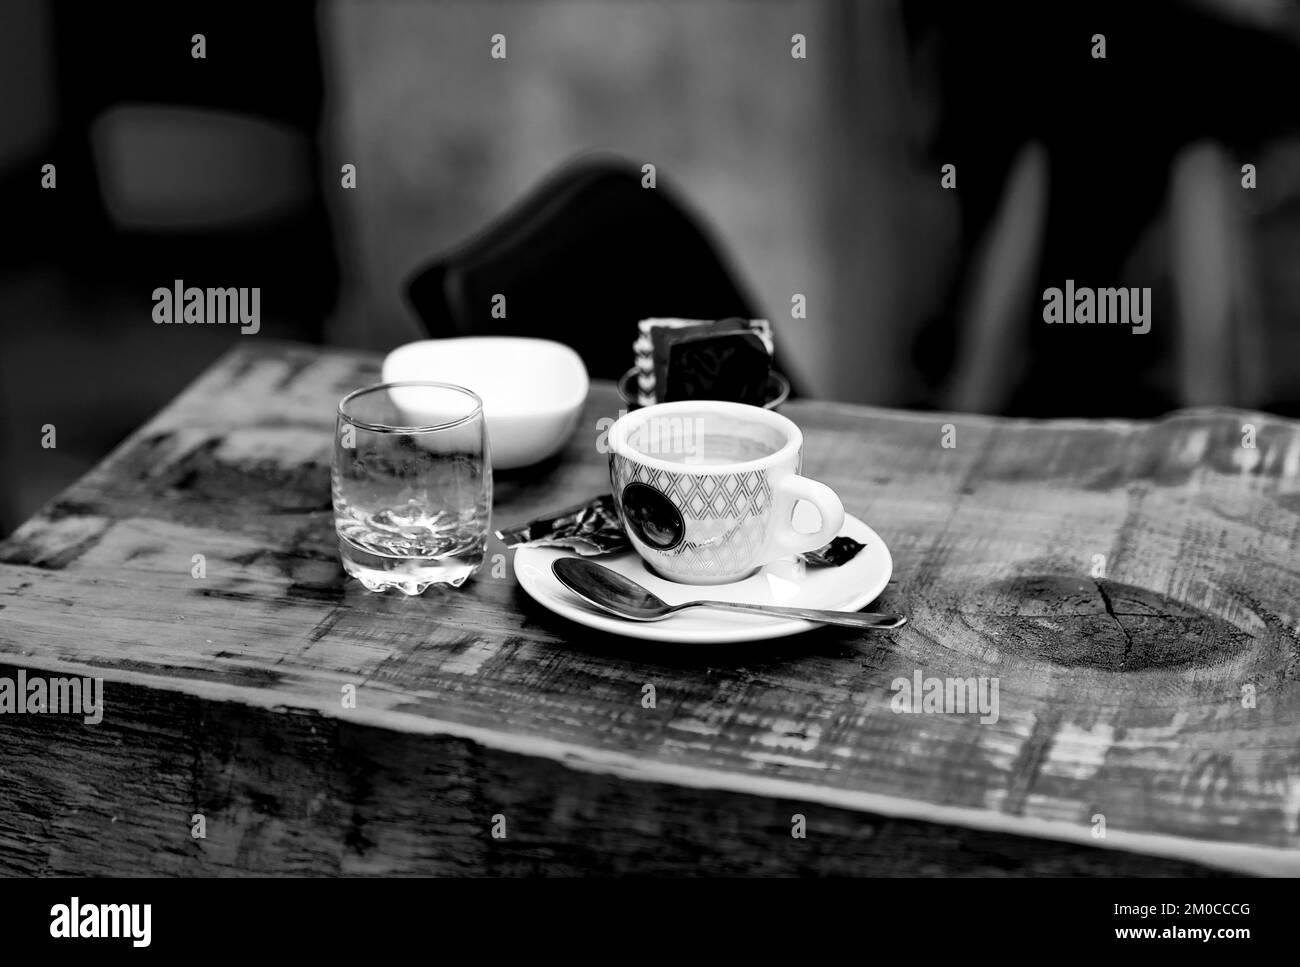 Espresso cup on table in black and white Stock Photo